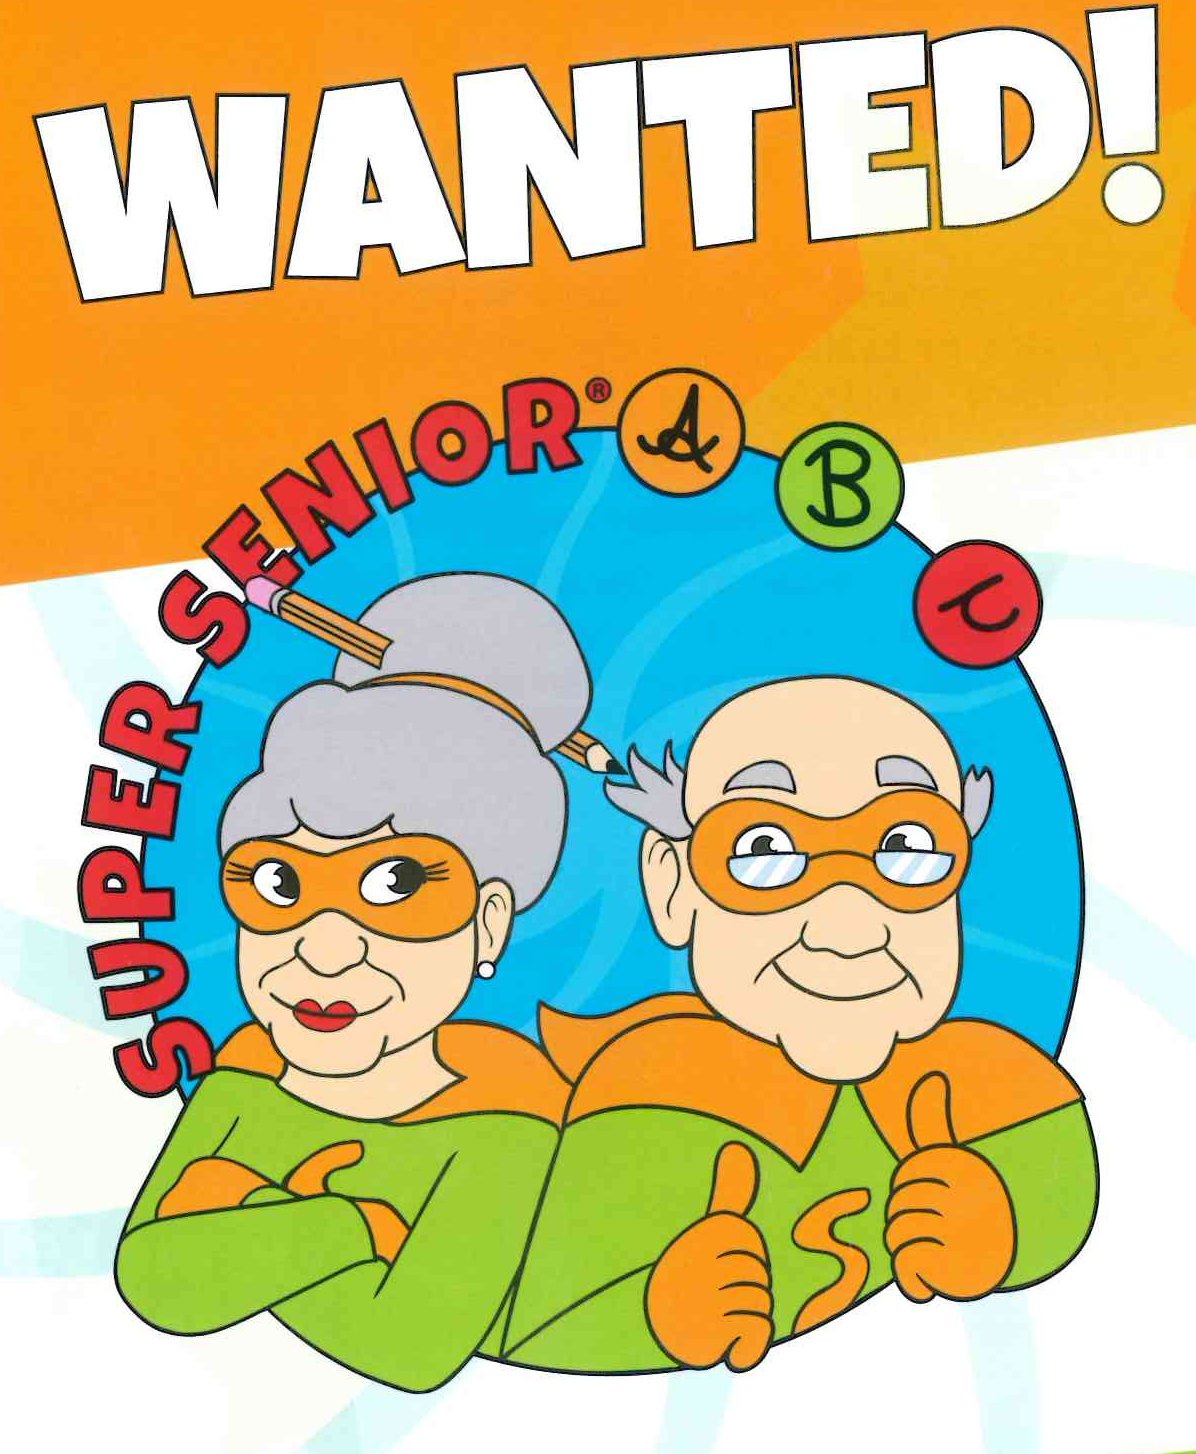 WANTED: SUPERSENIORS